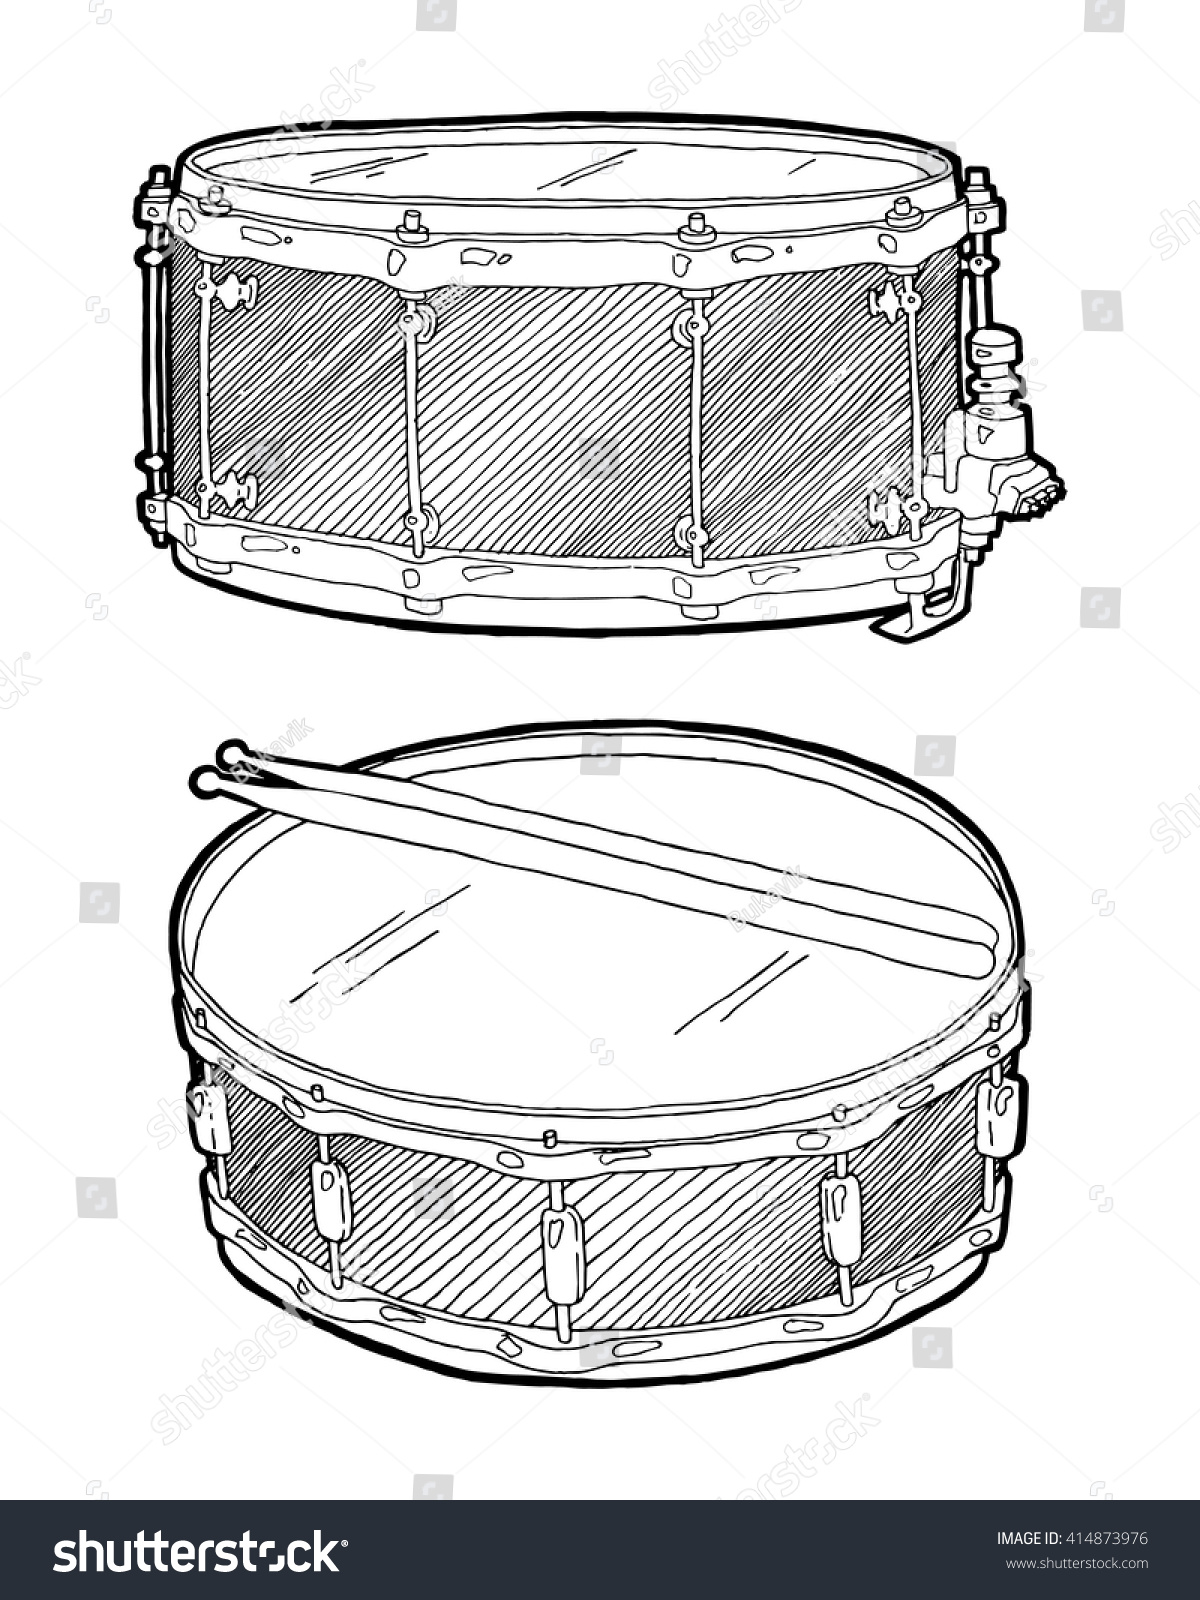 Snare Drum Sketch Drawing Isolated On Stock Vector 414873976 - Shutterstock